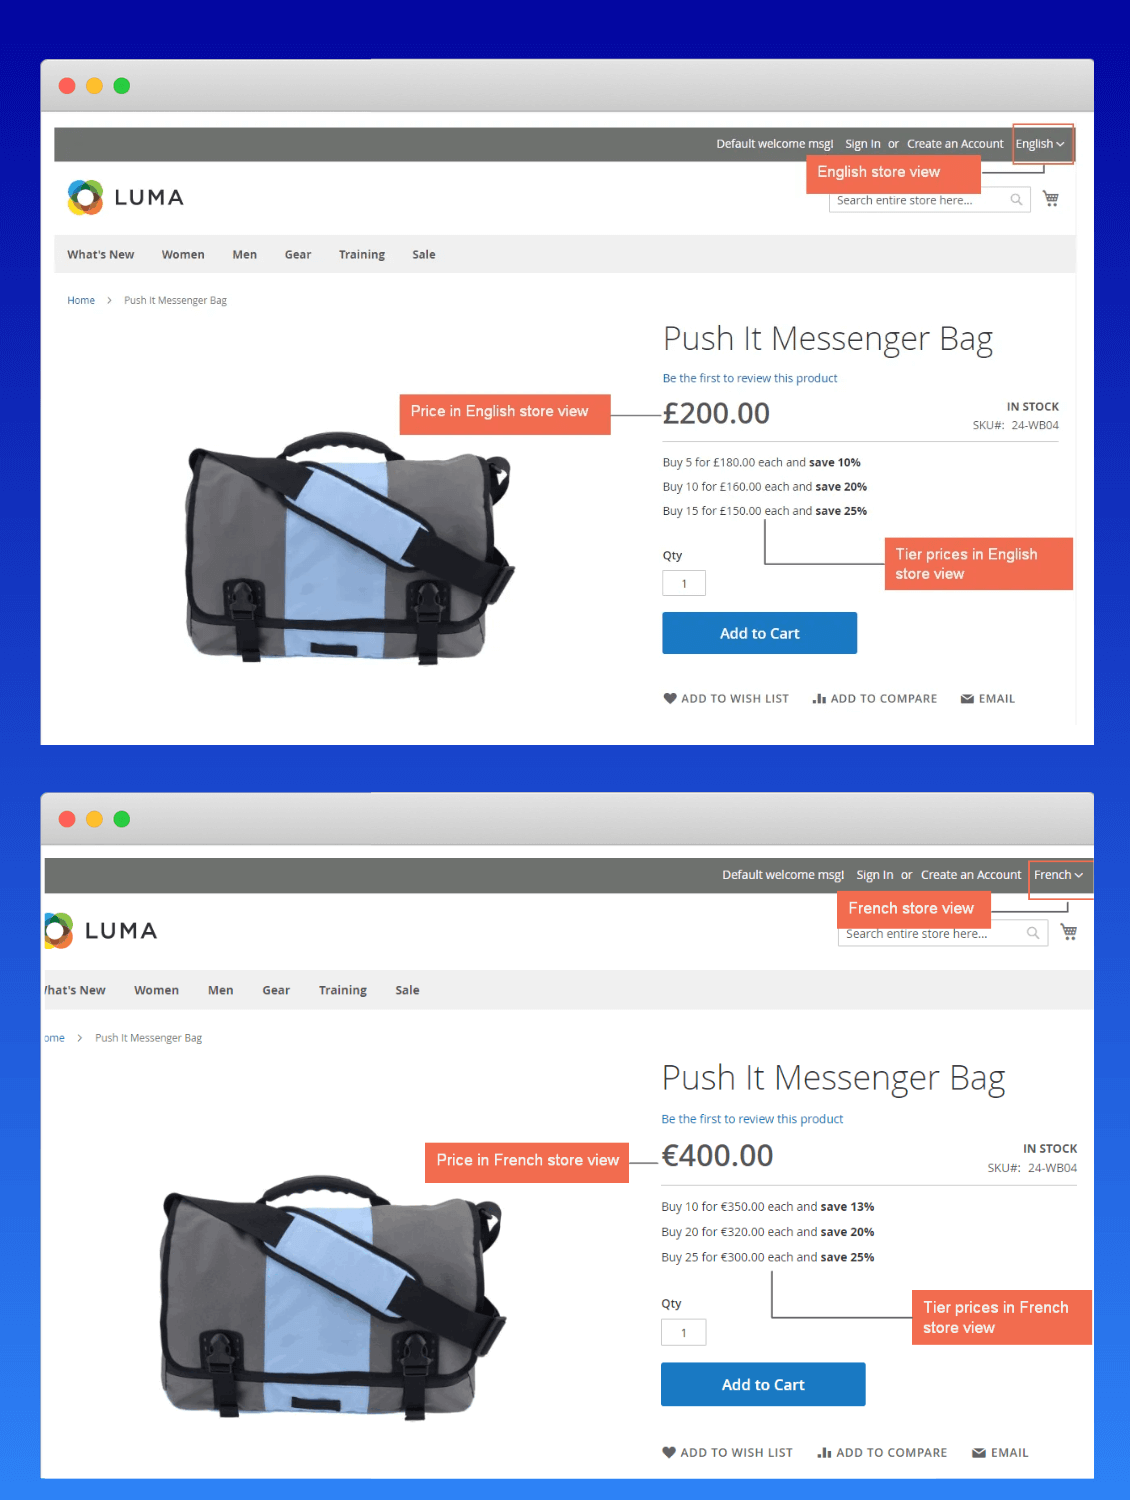 Setup different price types - same products each store view 